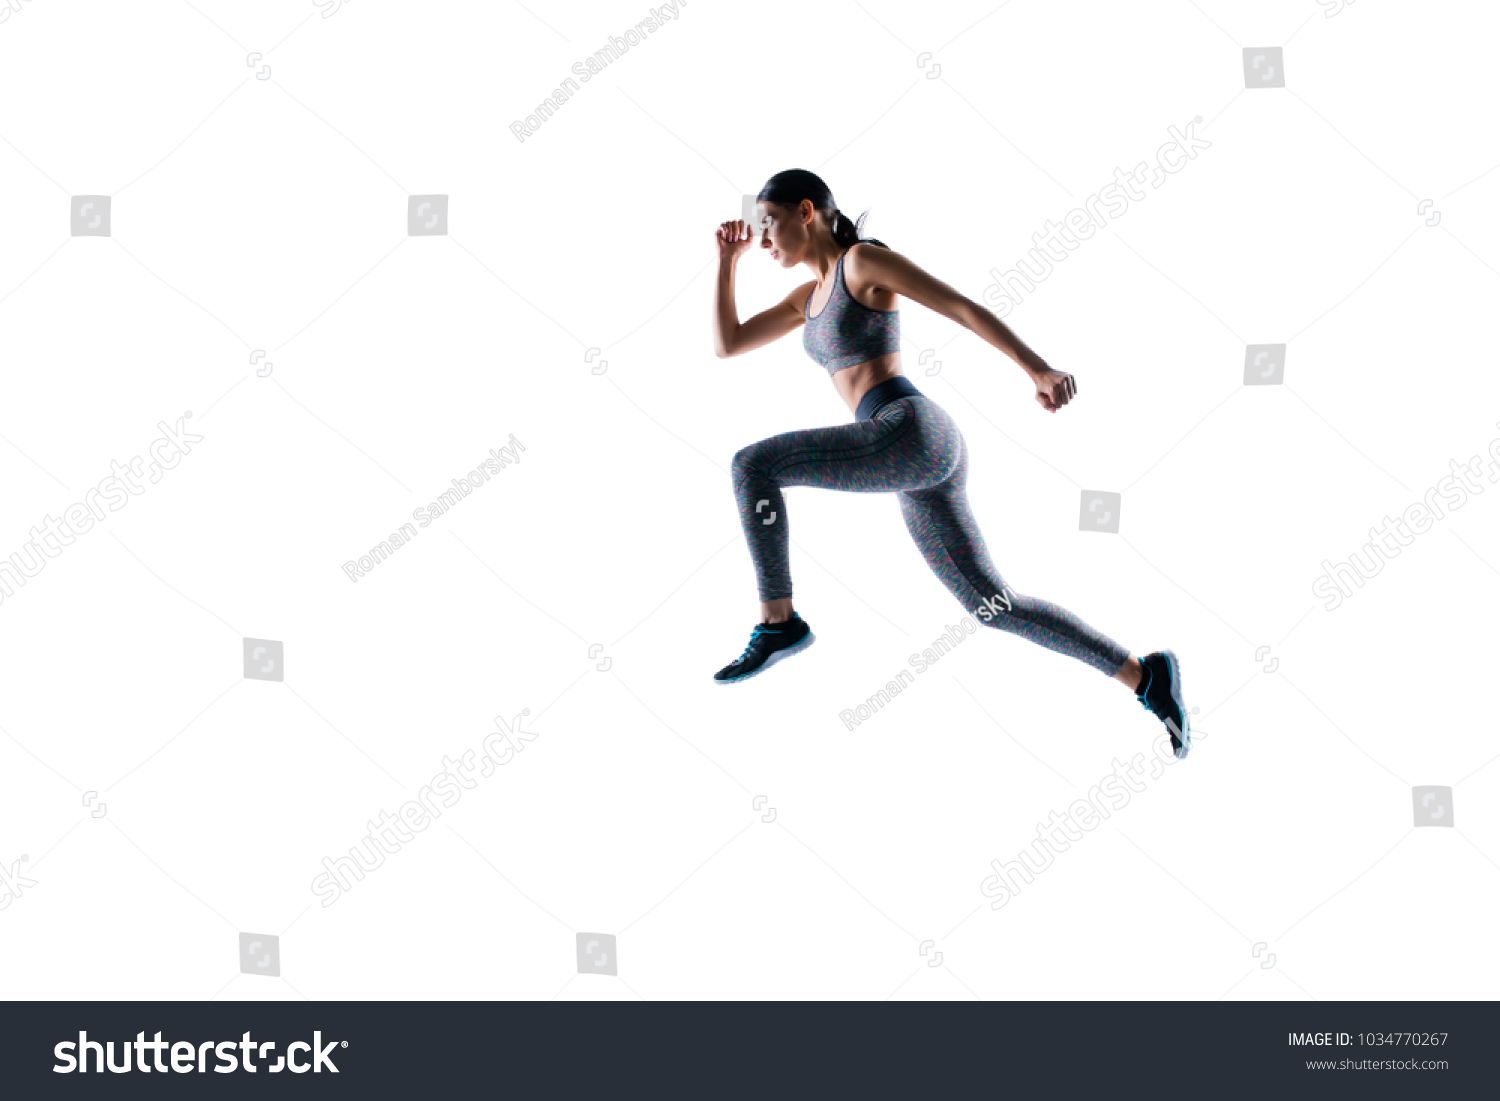 Ready steady go! Concept of endurance strength persistence in sport. Full length full size portrait of beautiful sporty energetic active purposeful sportswoman running and jumping, natural light #1034770267